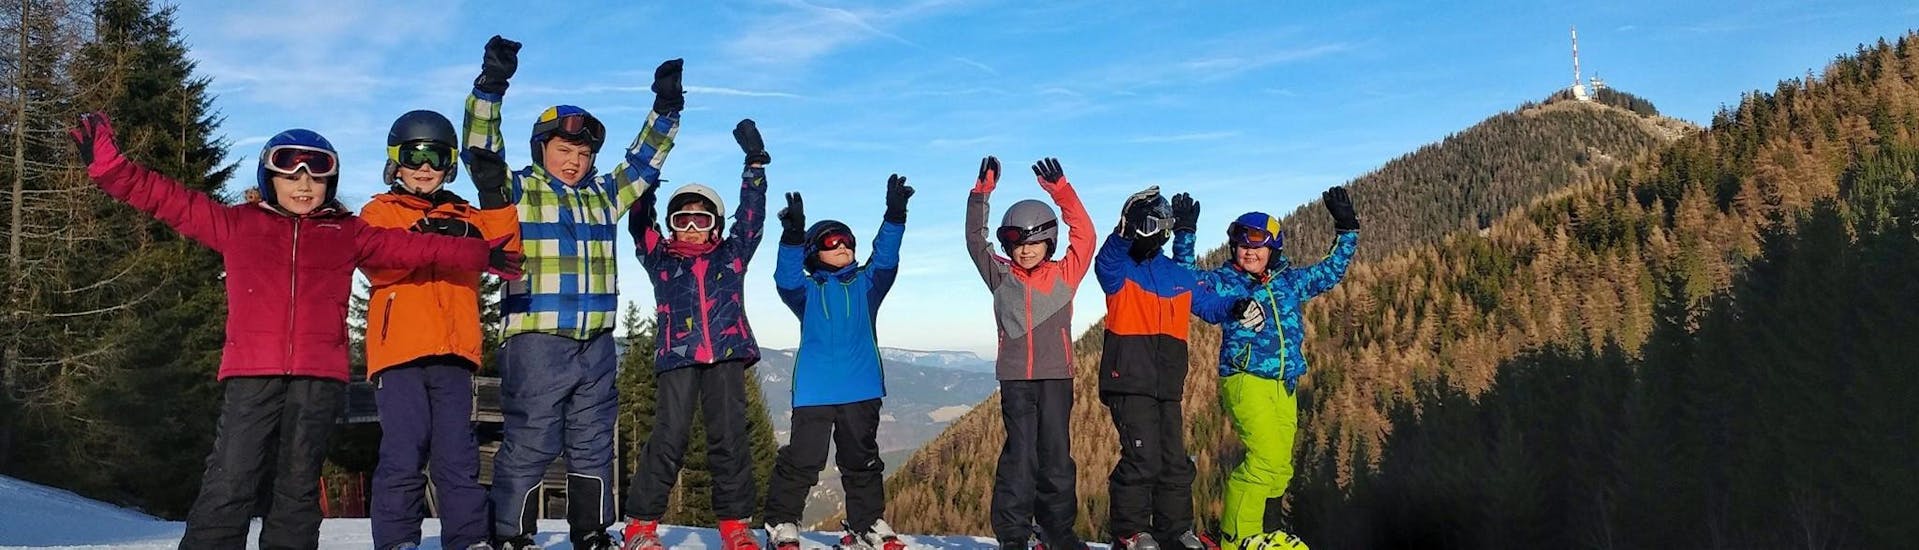 A group of kids cheering during their Kids Ski Lessons (5-17 y.) for Skiers with Experience.